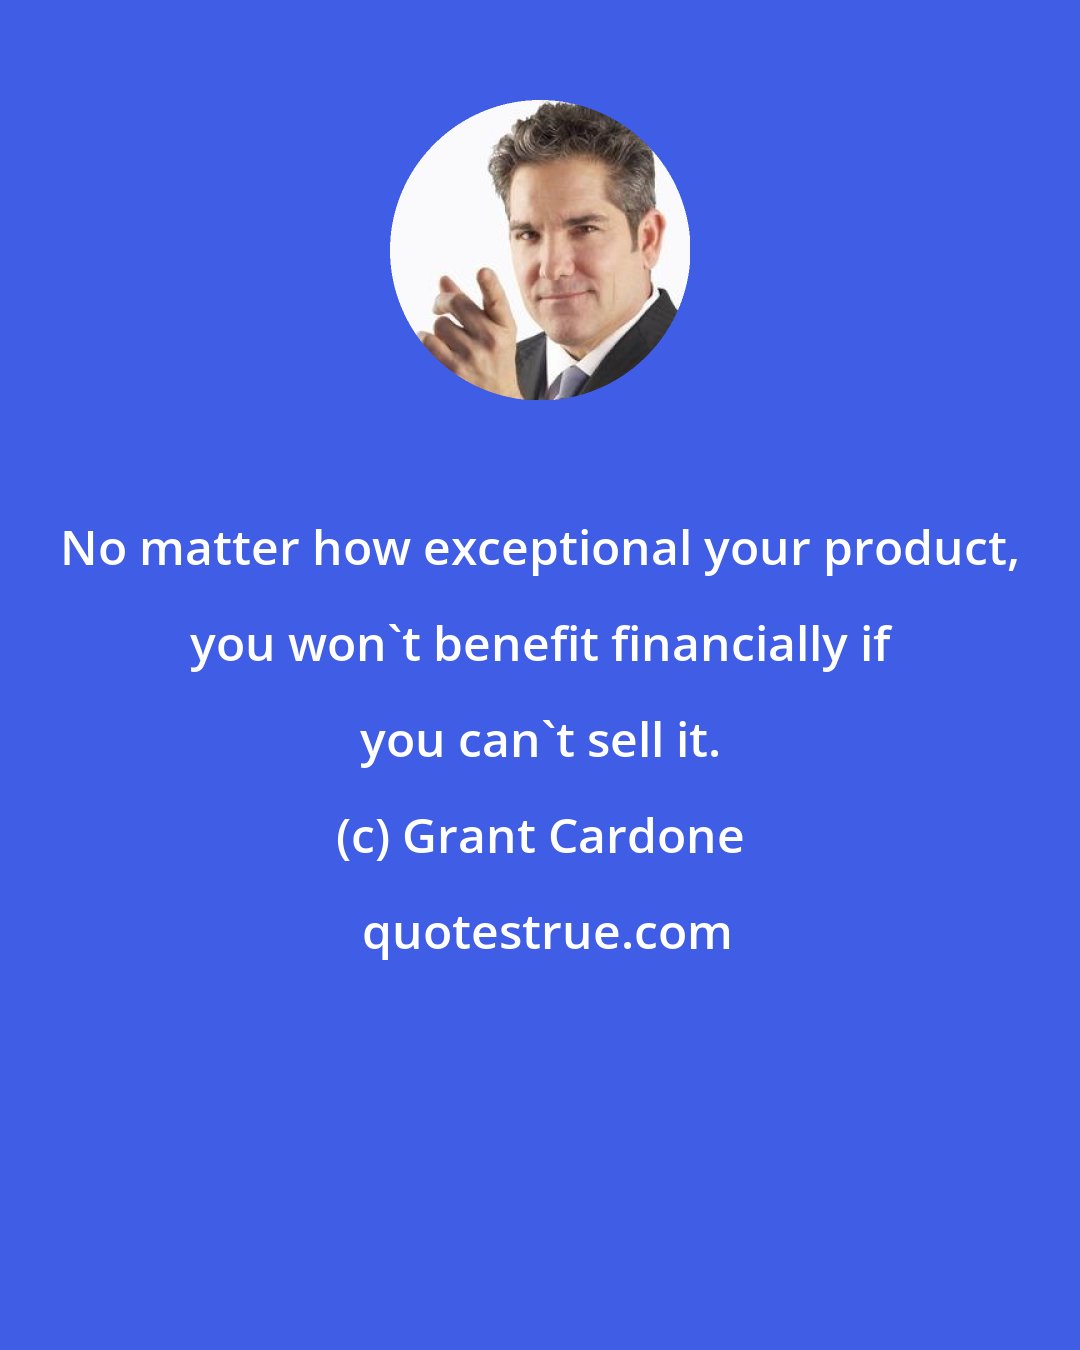 Grant Cardone: No matter how exceptional your product, you won't benefit financially if you can't sell it.